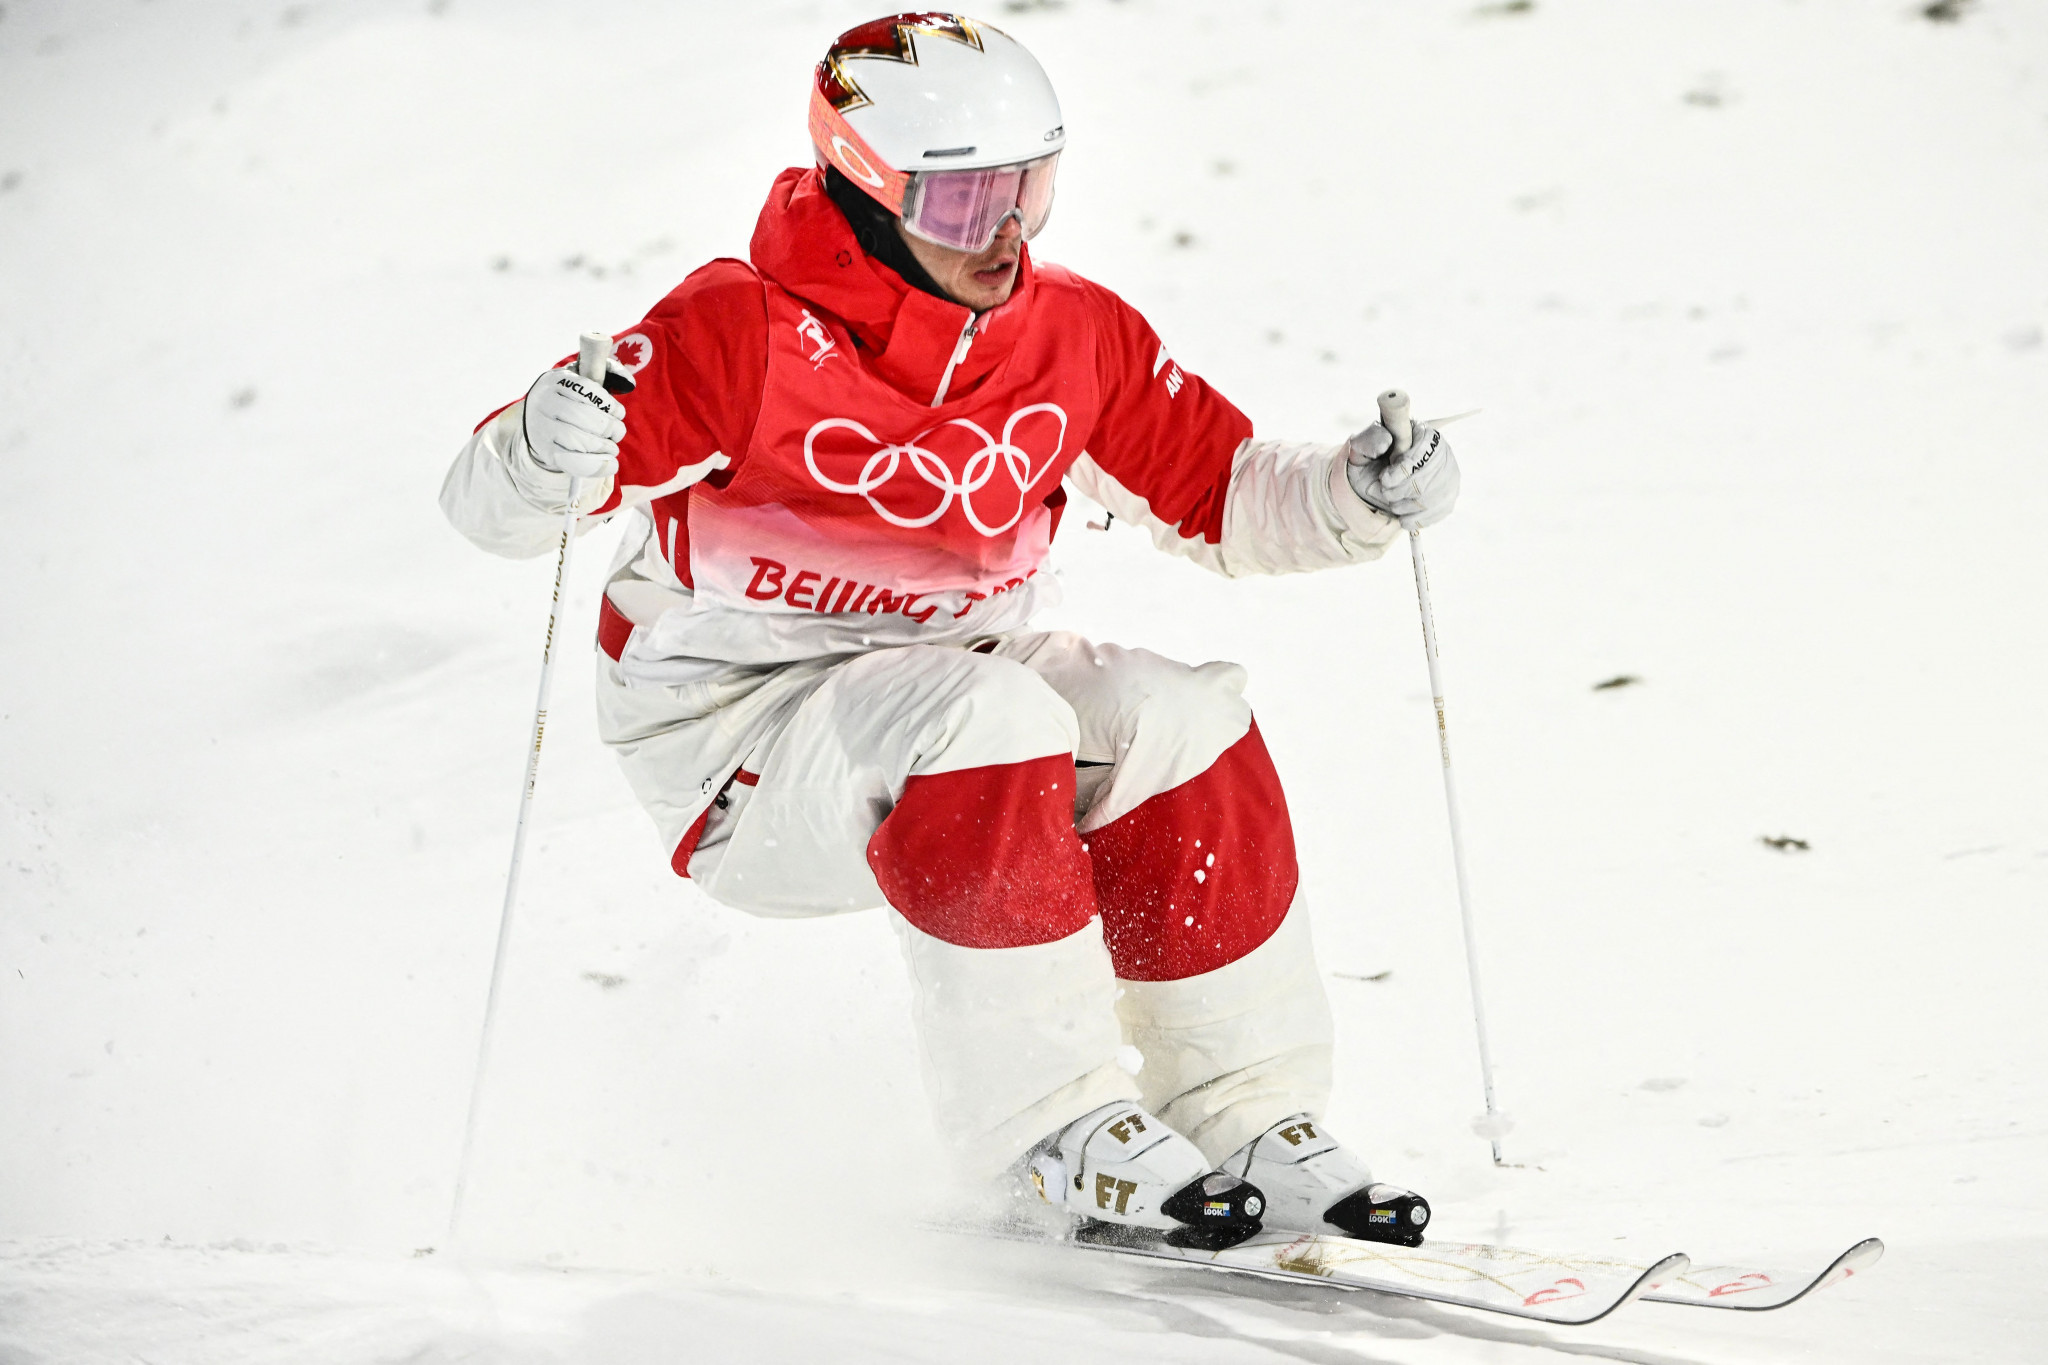 Mikaël Kingsbury of Canada topped the men's moguls qualification ©Getty Images